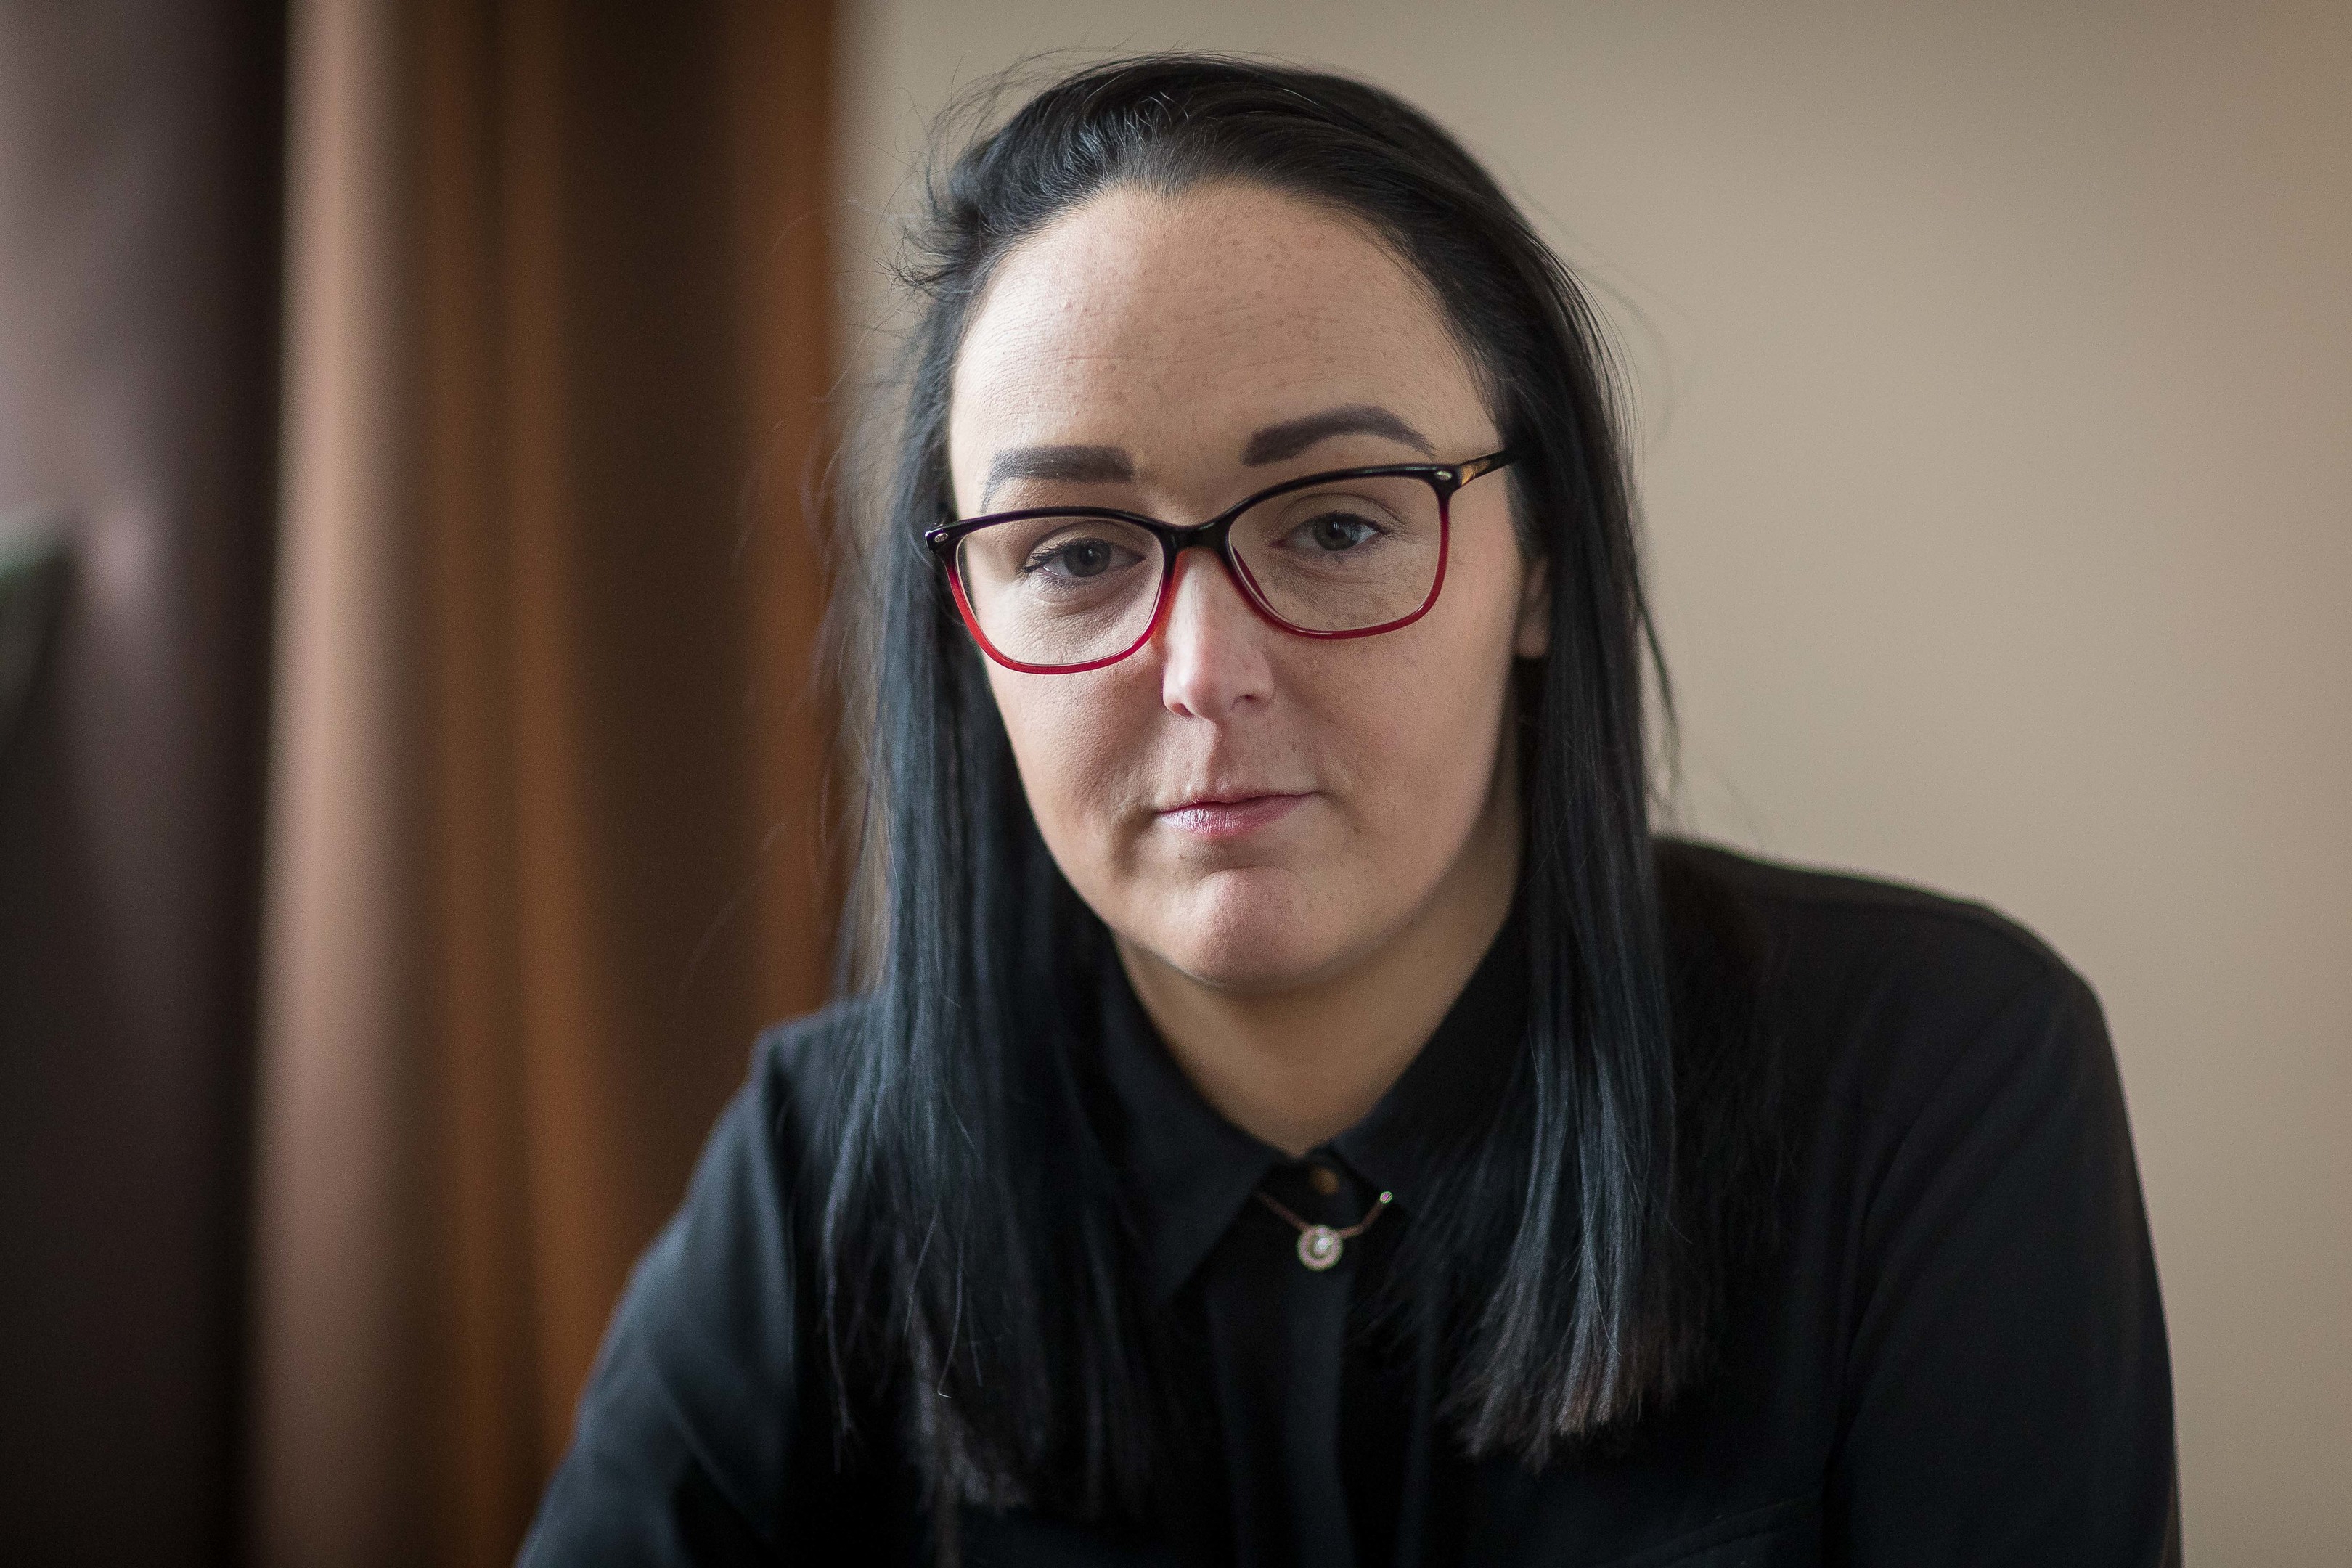 Aberdeen rape victim waives her right to anonymity and speaks out about her ordeal.